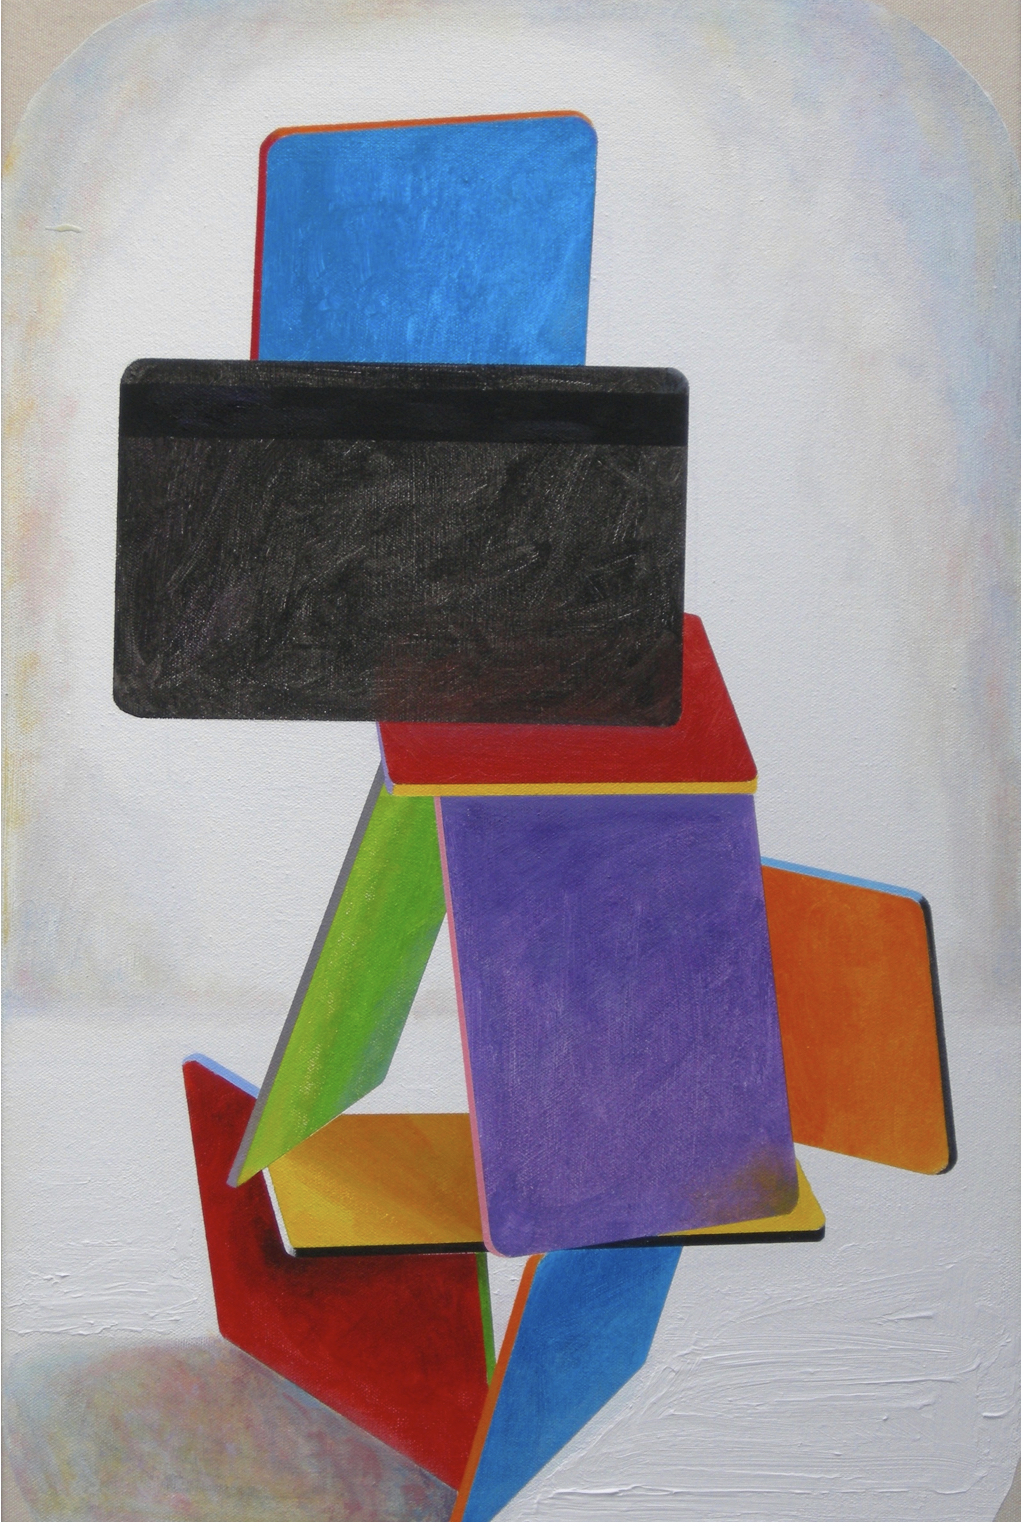 Image of Contemporary art piece titled House of Credit Cards #12 by Shawn Shepherd  